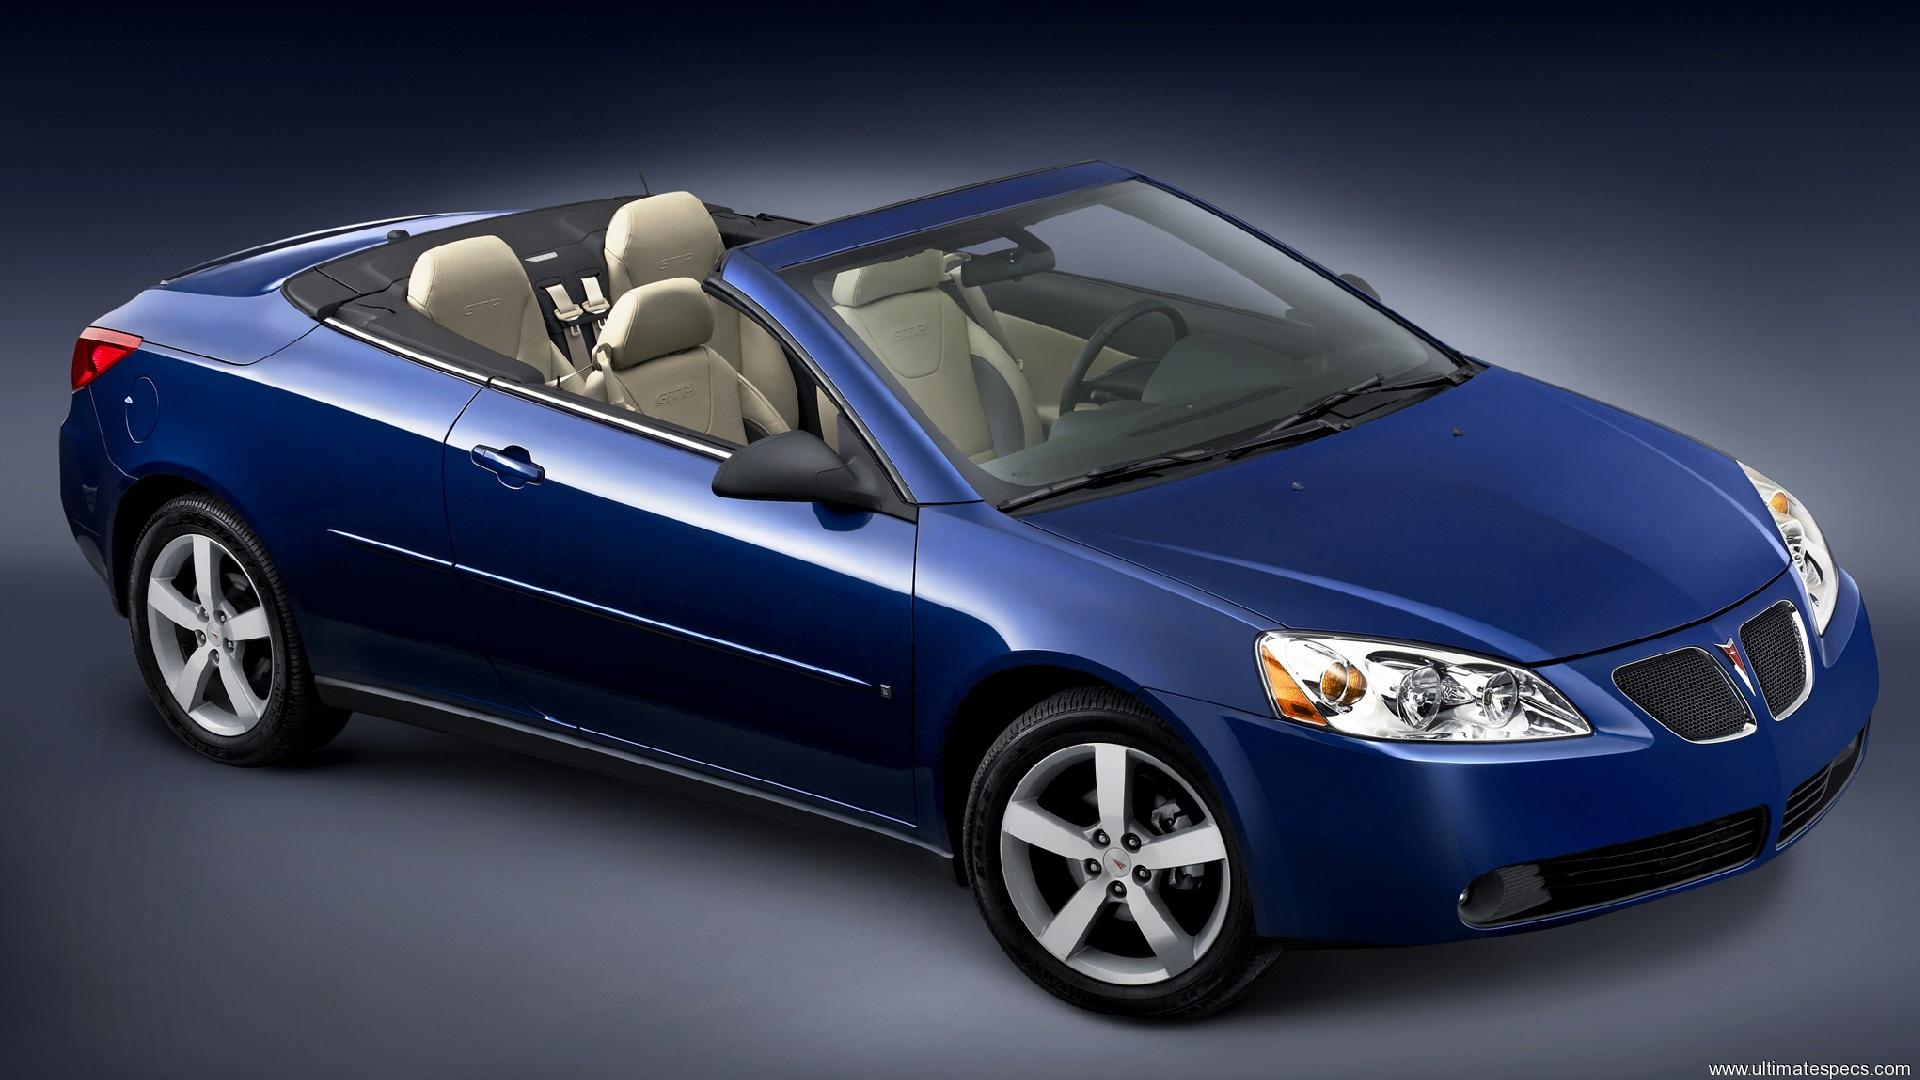 Pontiac G6 Convertible Images, pictures, gallery